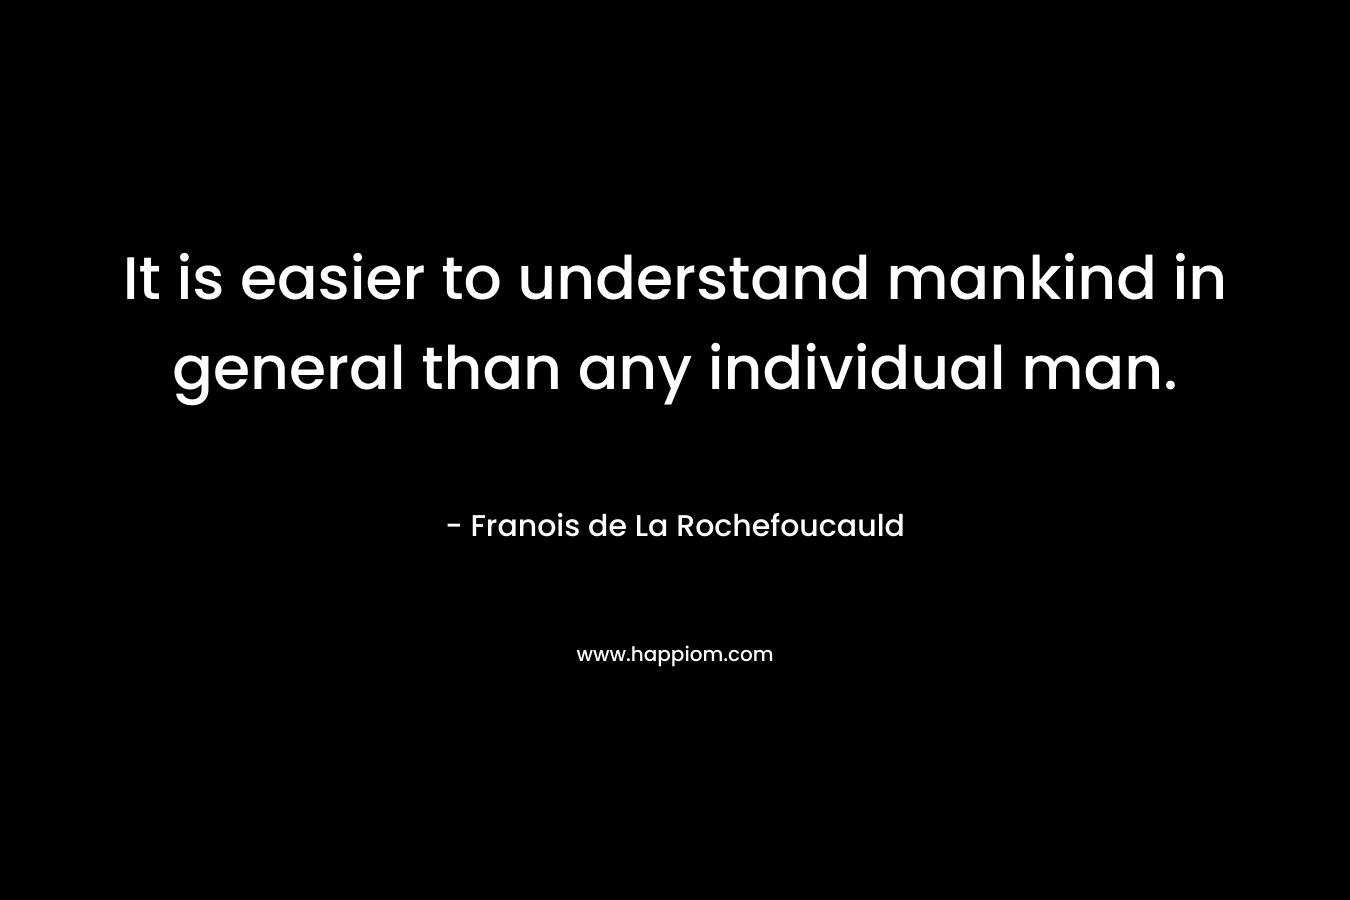 It is easier to understand mankind in general than any individual man.